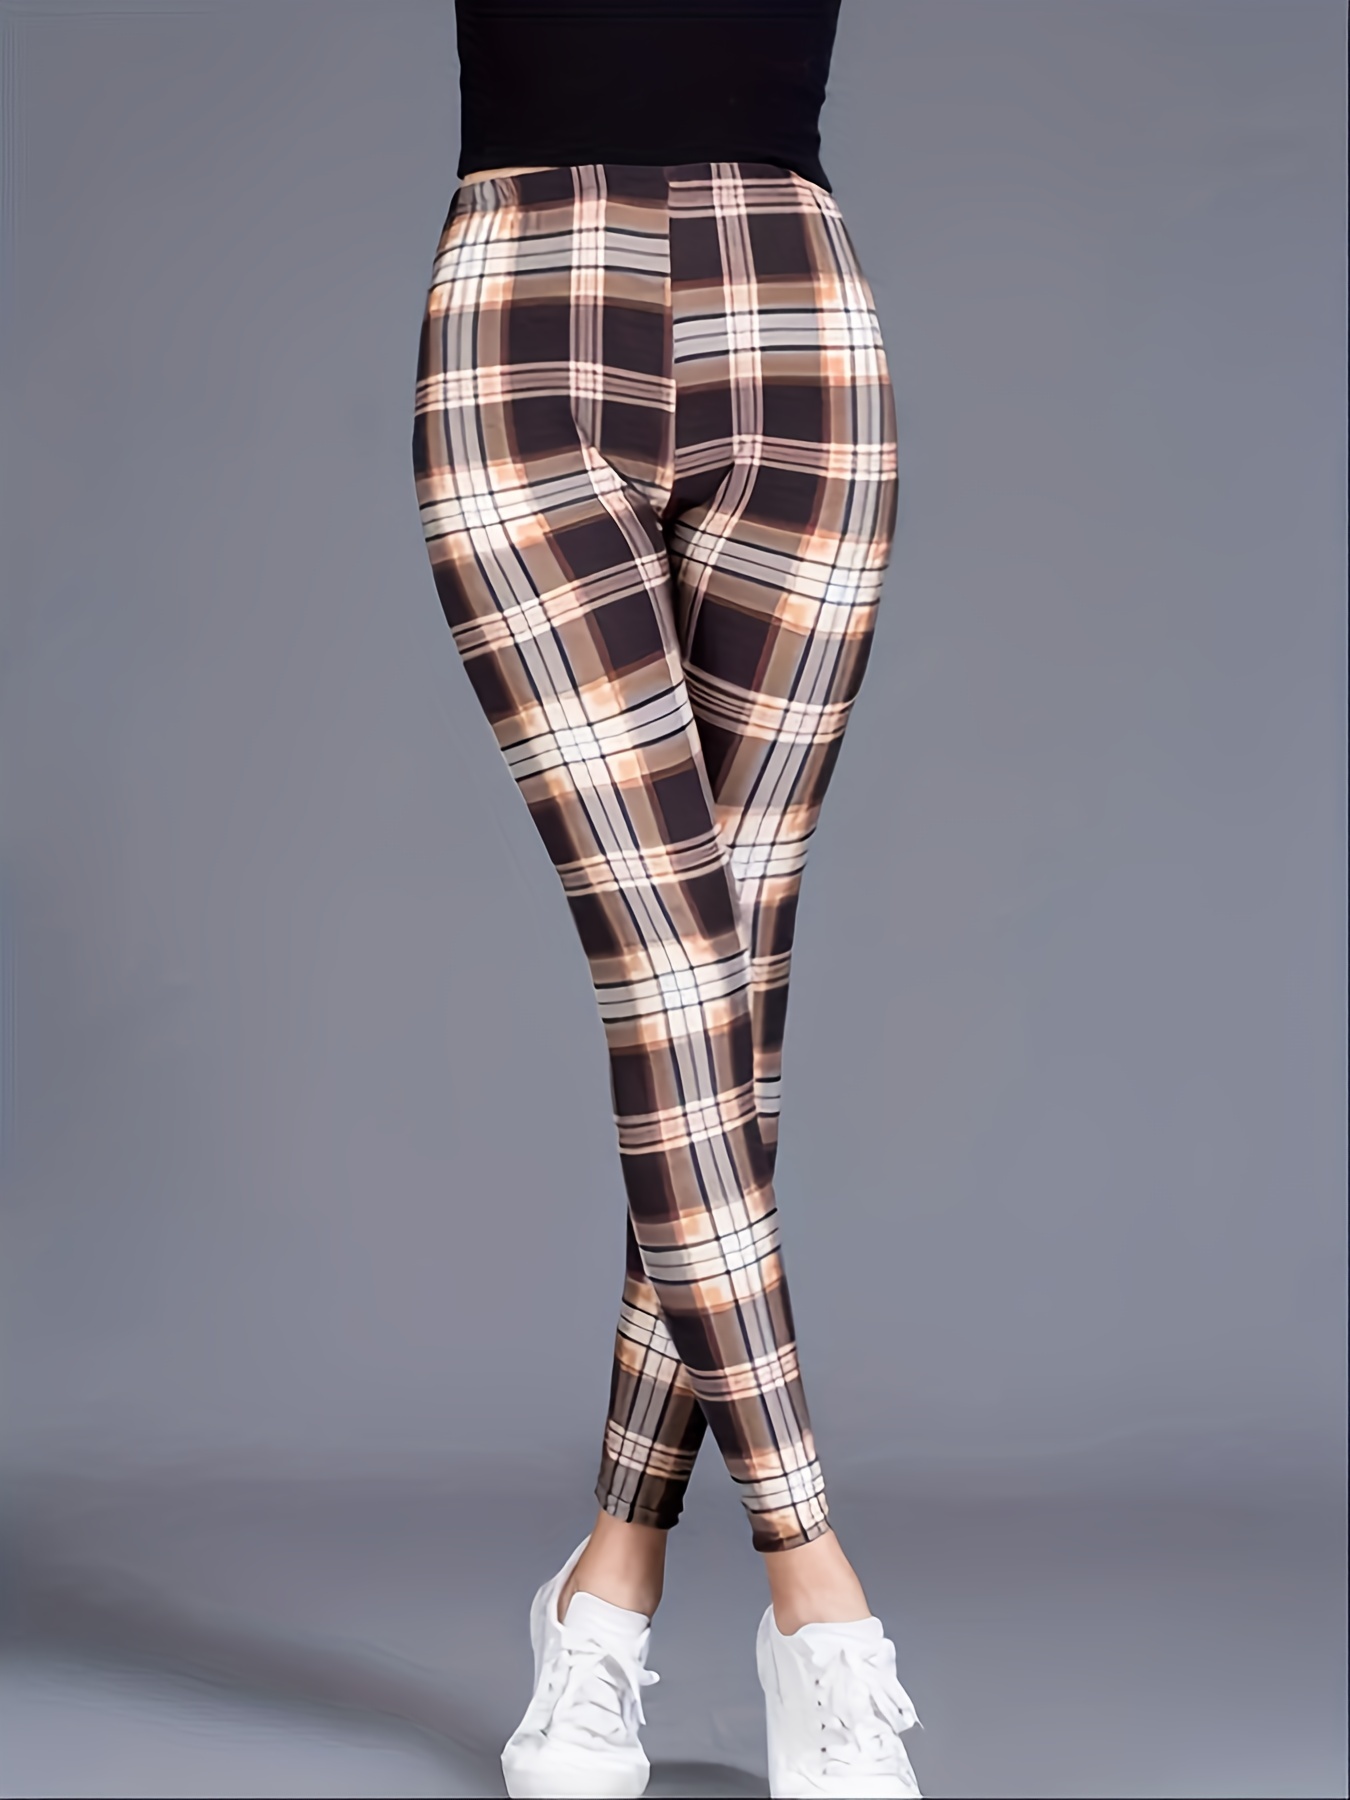 Y2K Plaid Print Primark Cosy Leggings Push Up, Slim Fit, Brown Color Sexy  And Stylish Trousers For Ladies From Matthewaw, $13.18